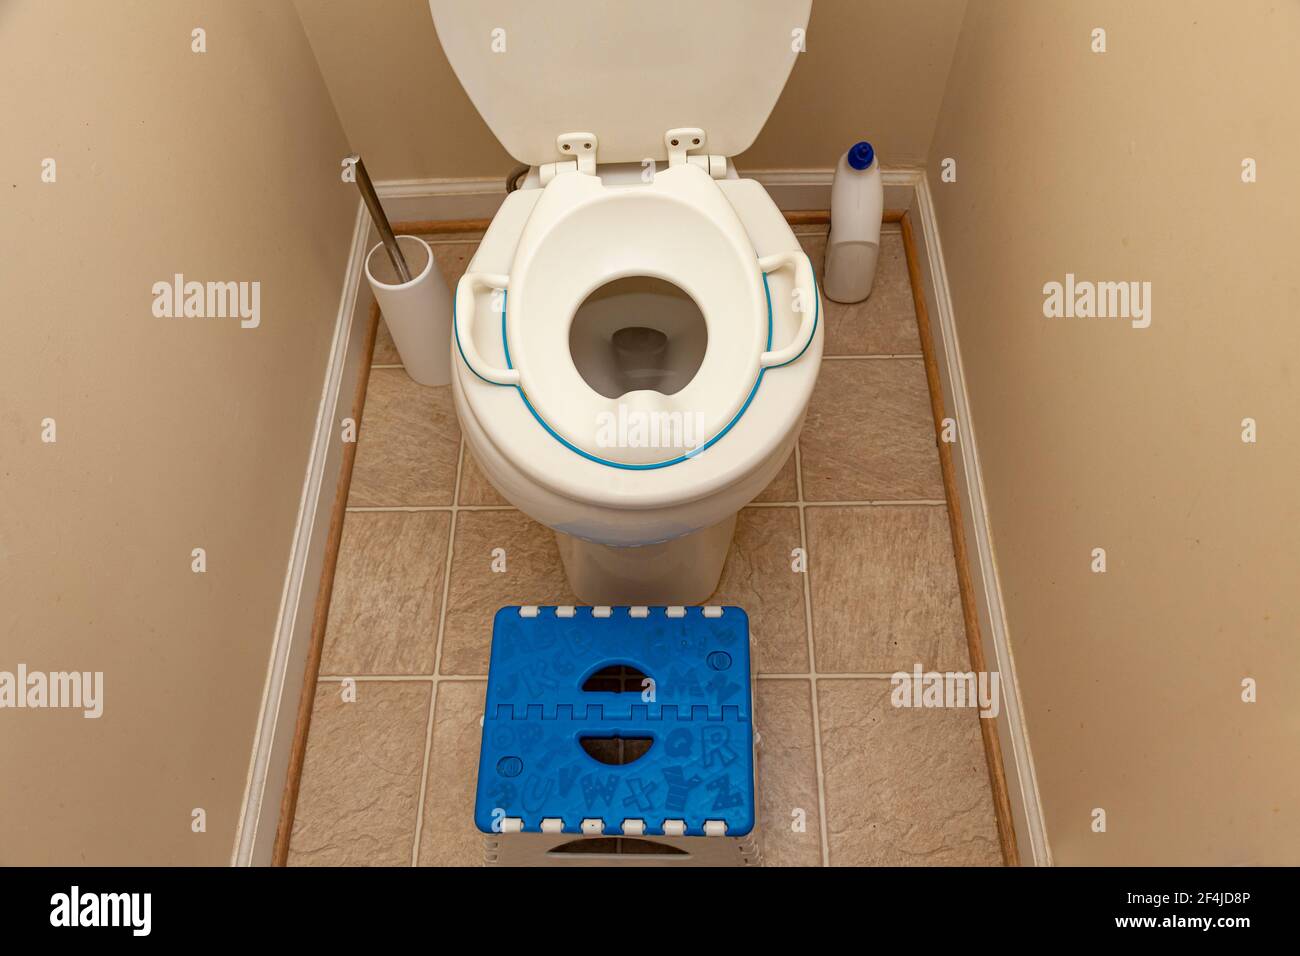 A child toilet seat attachment placed on top of a toilet for a kid during potty training. A step plastic stool is placed to help the kid get up to the Stock Photo